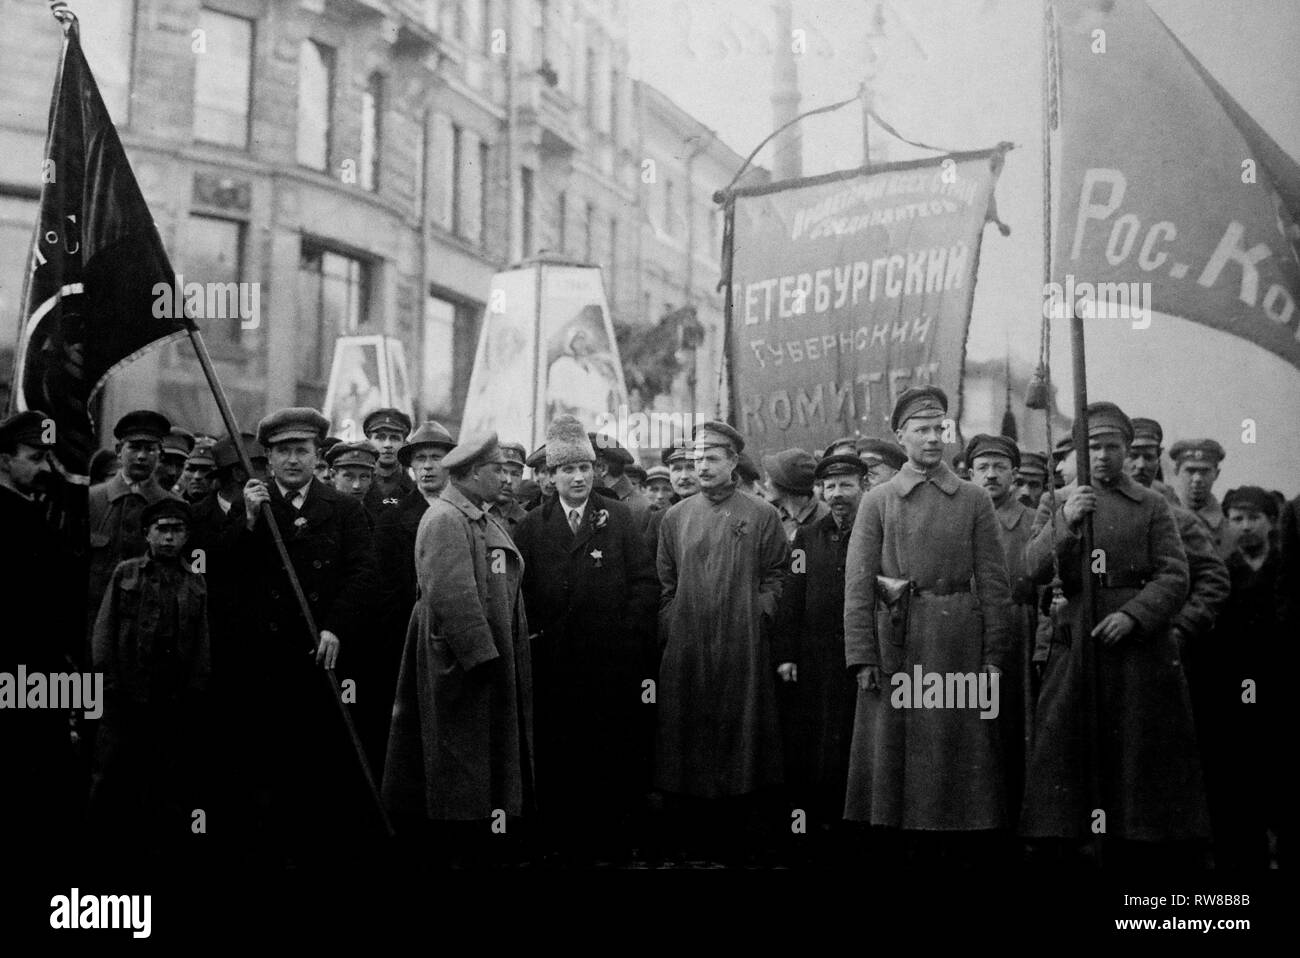 The document shows several Bolshevik leaders in front of a procession for the 1st of May, 1920. In the center, one recognizes Grigori Zinoviev with an Astrakhan. The central banner reads: 'Committee of the Petrograd Province'.  Third on the right from Zinoviev, the man may be Nikolaï Bukharine (1888-1938), member of the Politburo and the Central Committee of the Communist Party, to whom Lenin referred as 'the favorite son of the Party'. Stock Photo